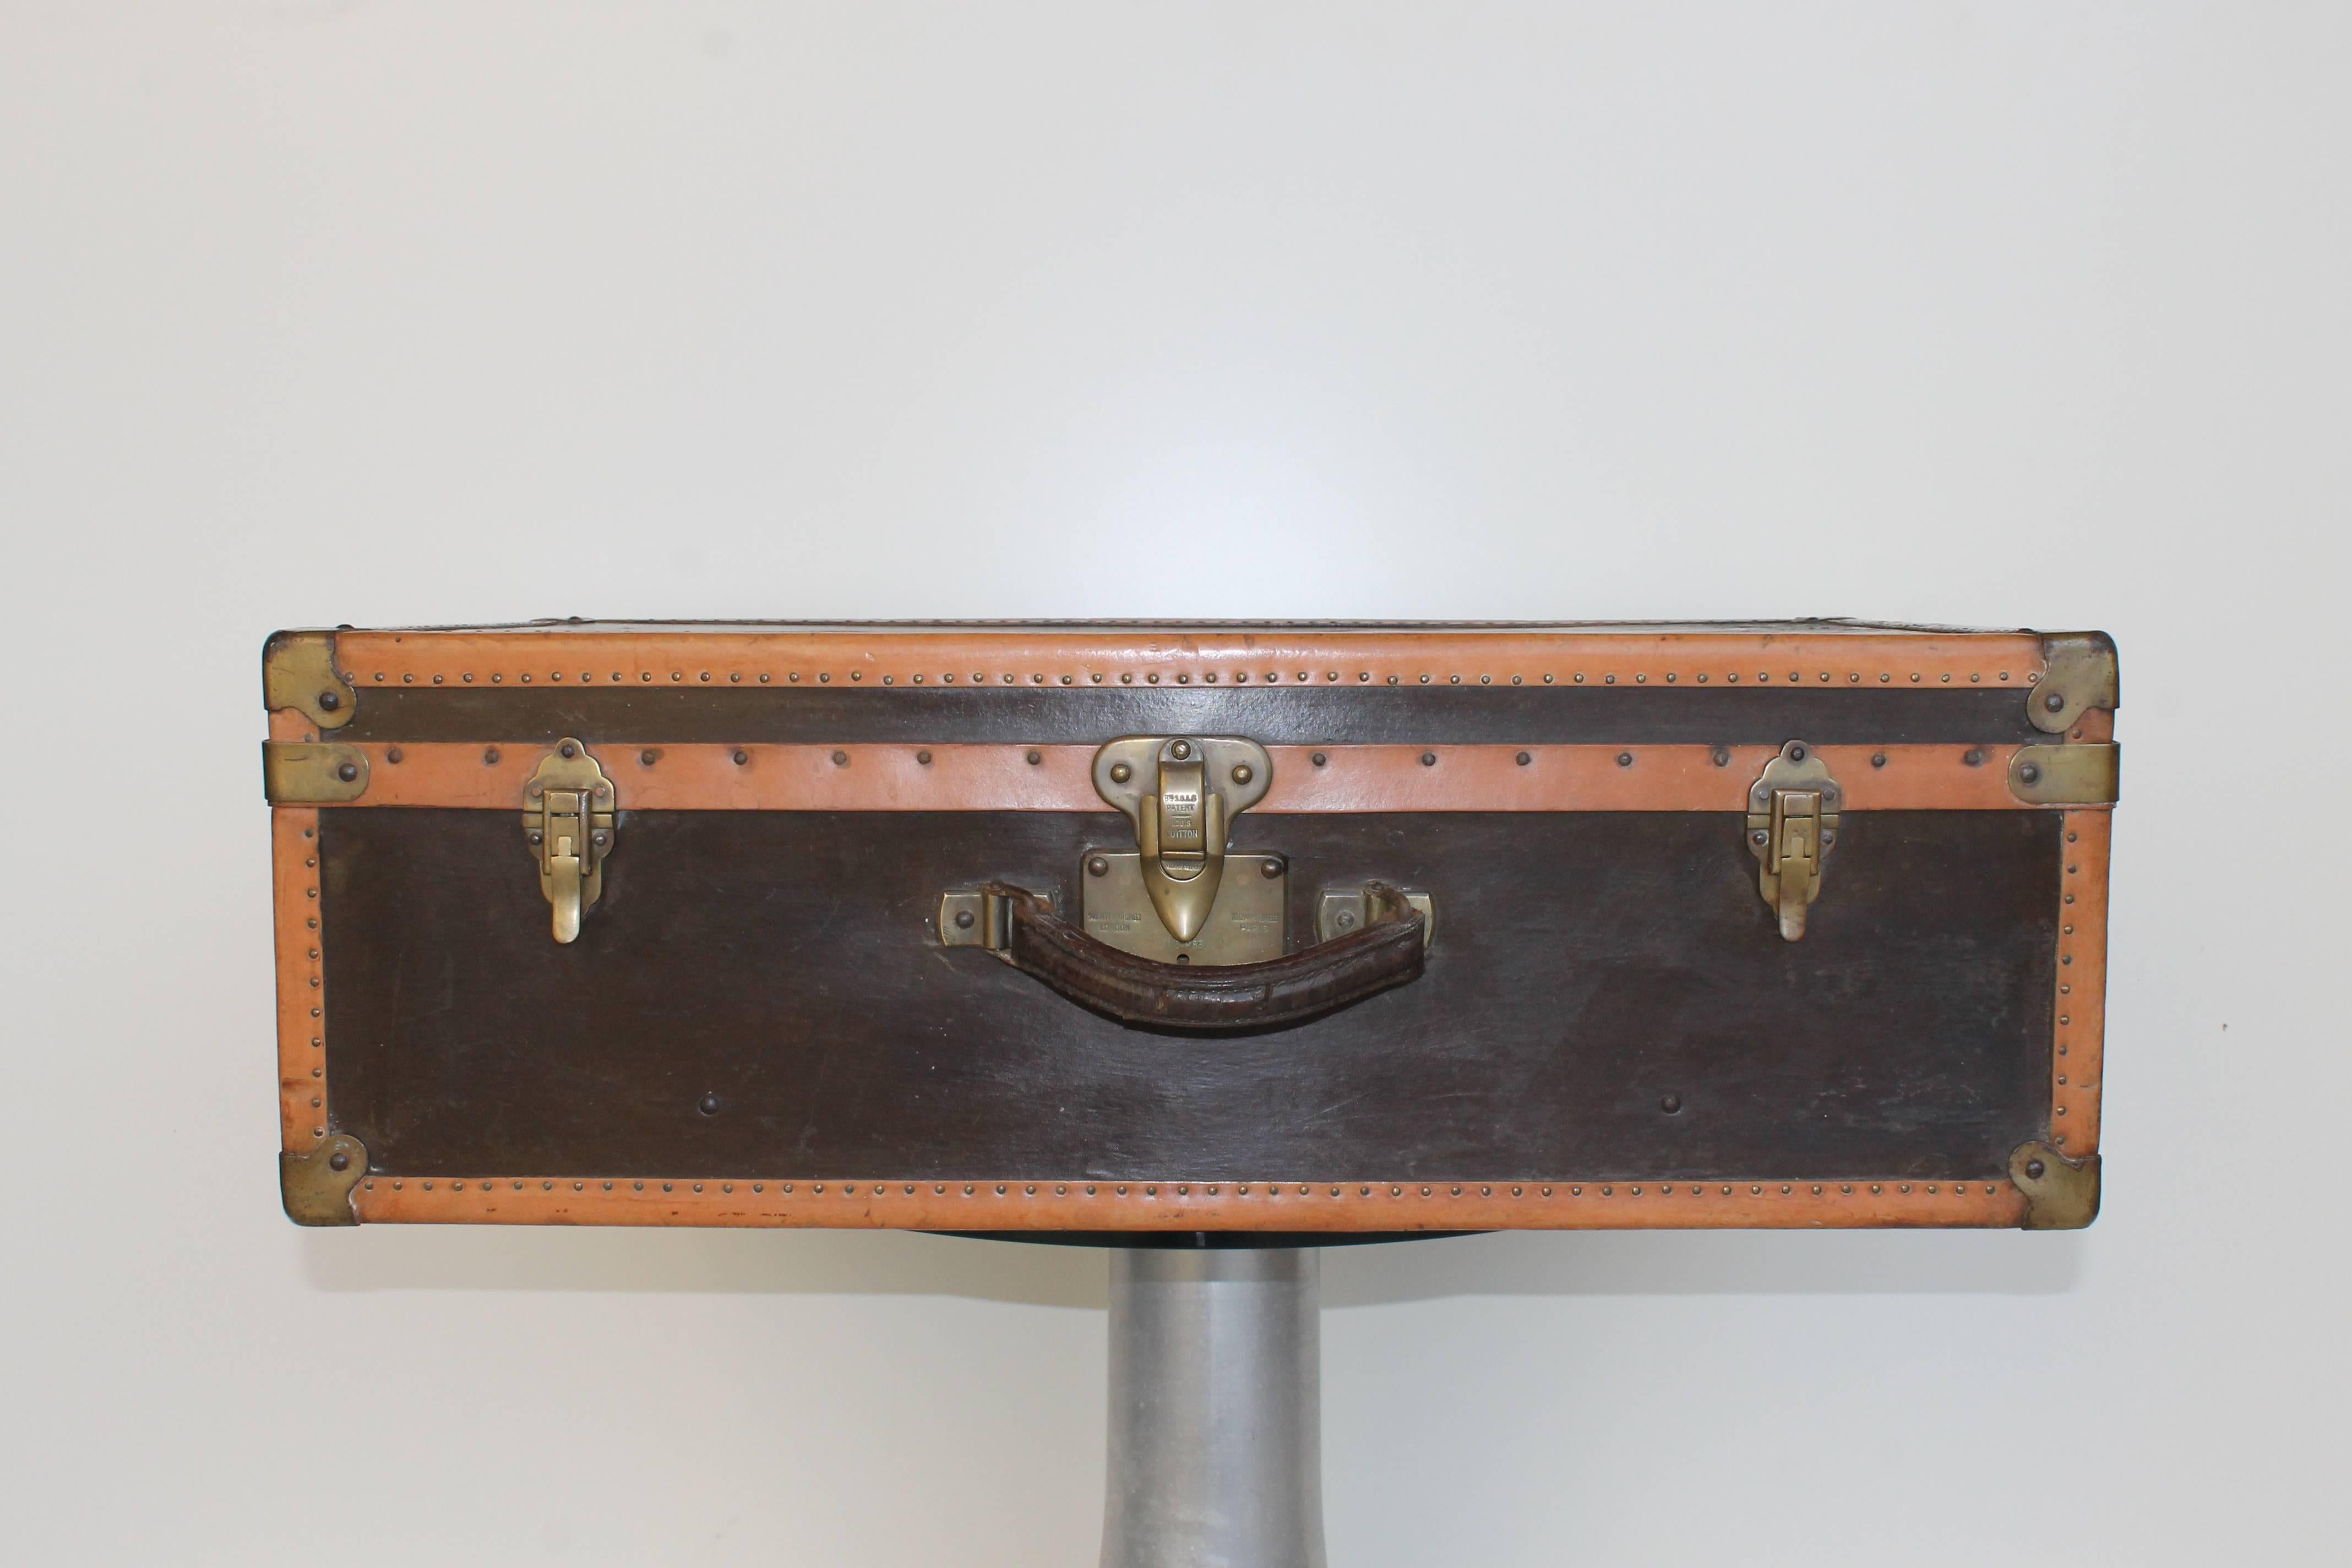 Suitcase by Louis Vuitton, dated 1910 circa. Engraved latch, brown and camel leather.